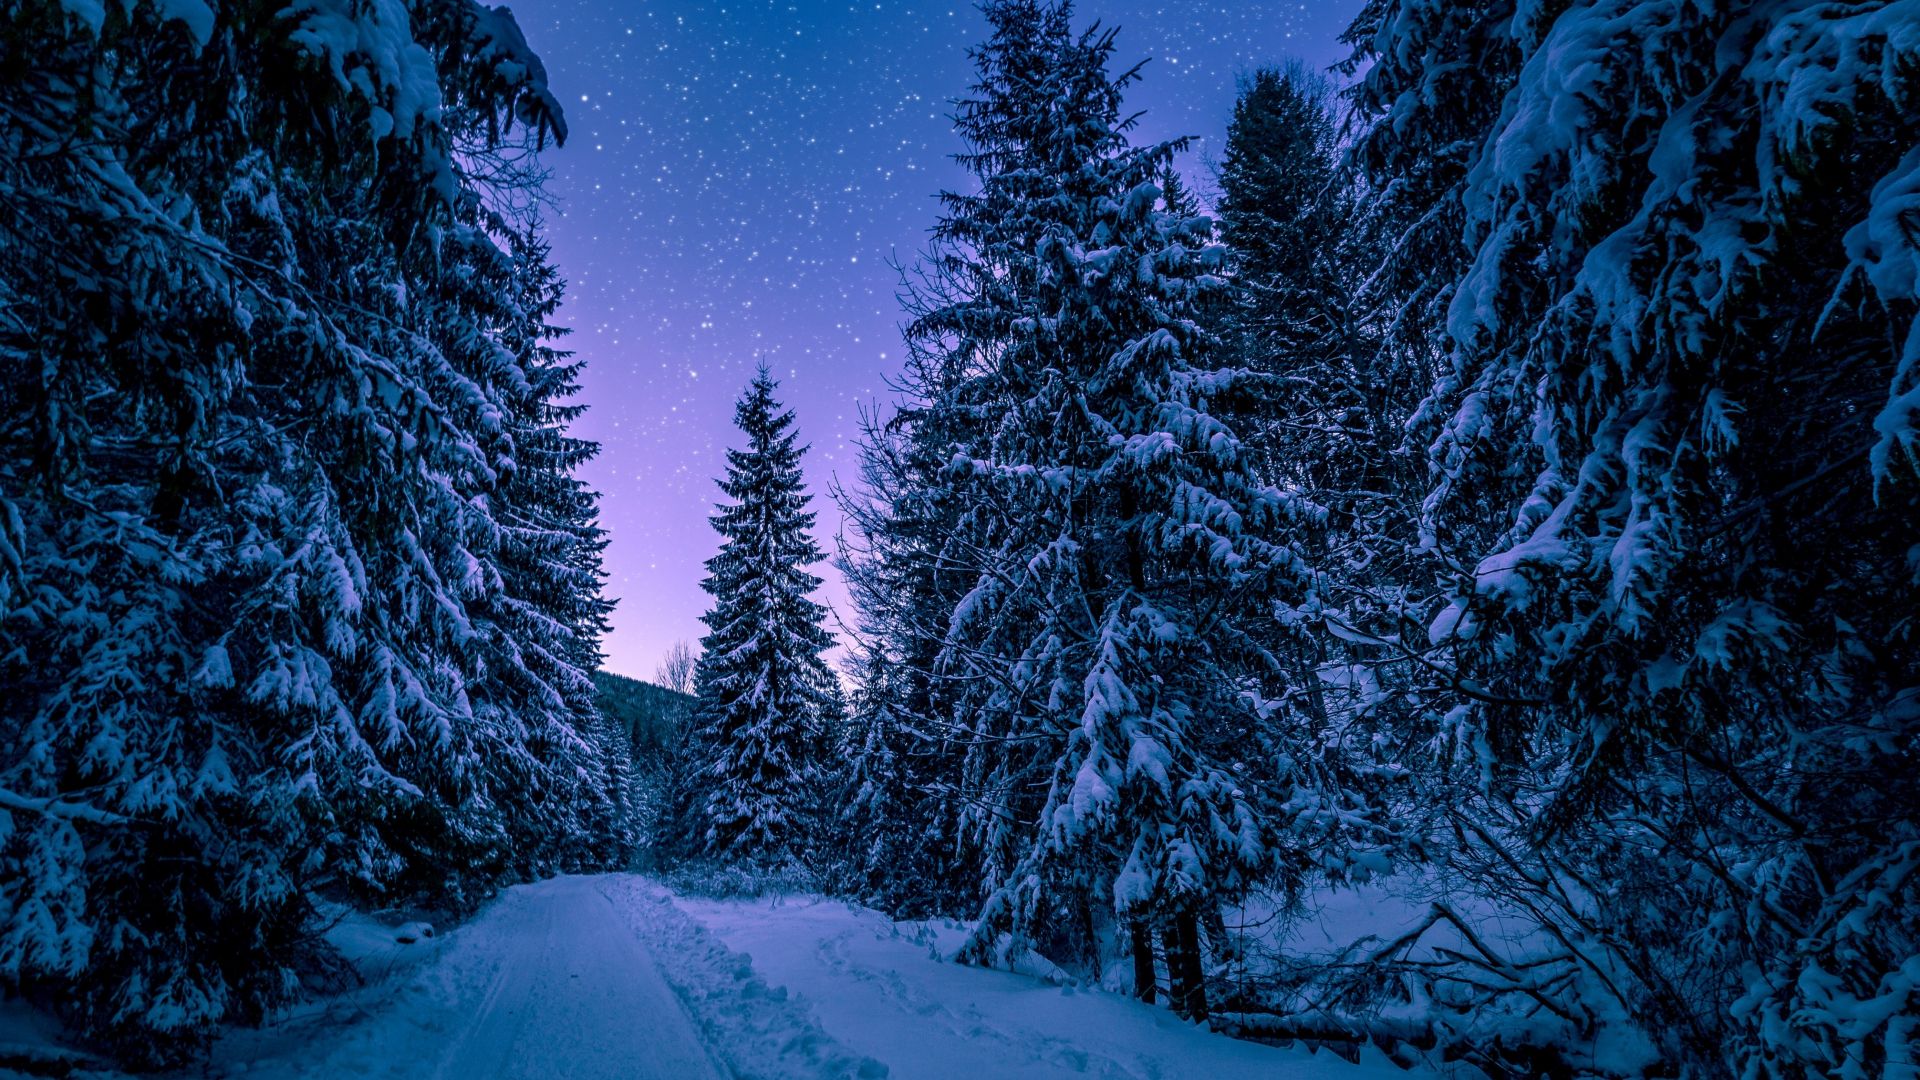 Forest, trees, night, winter wallpaper, HD image, picture, background, d814ca